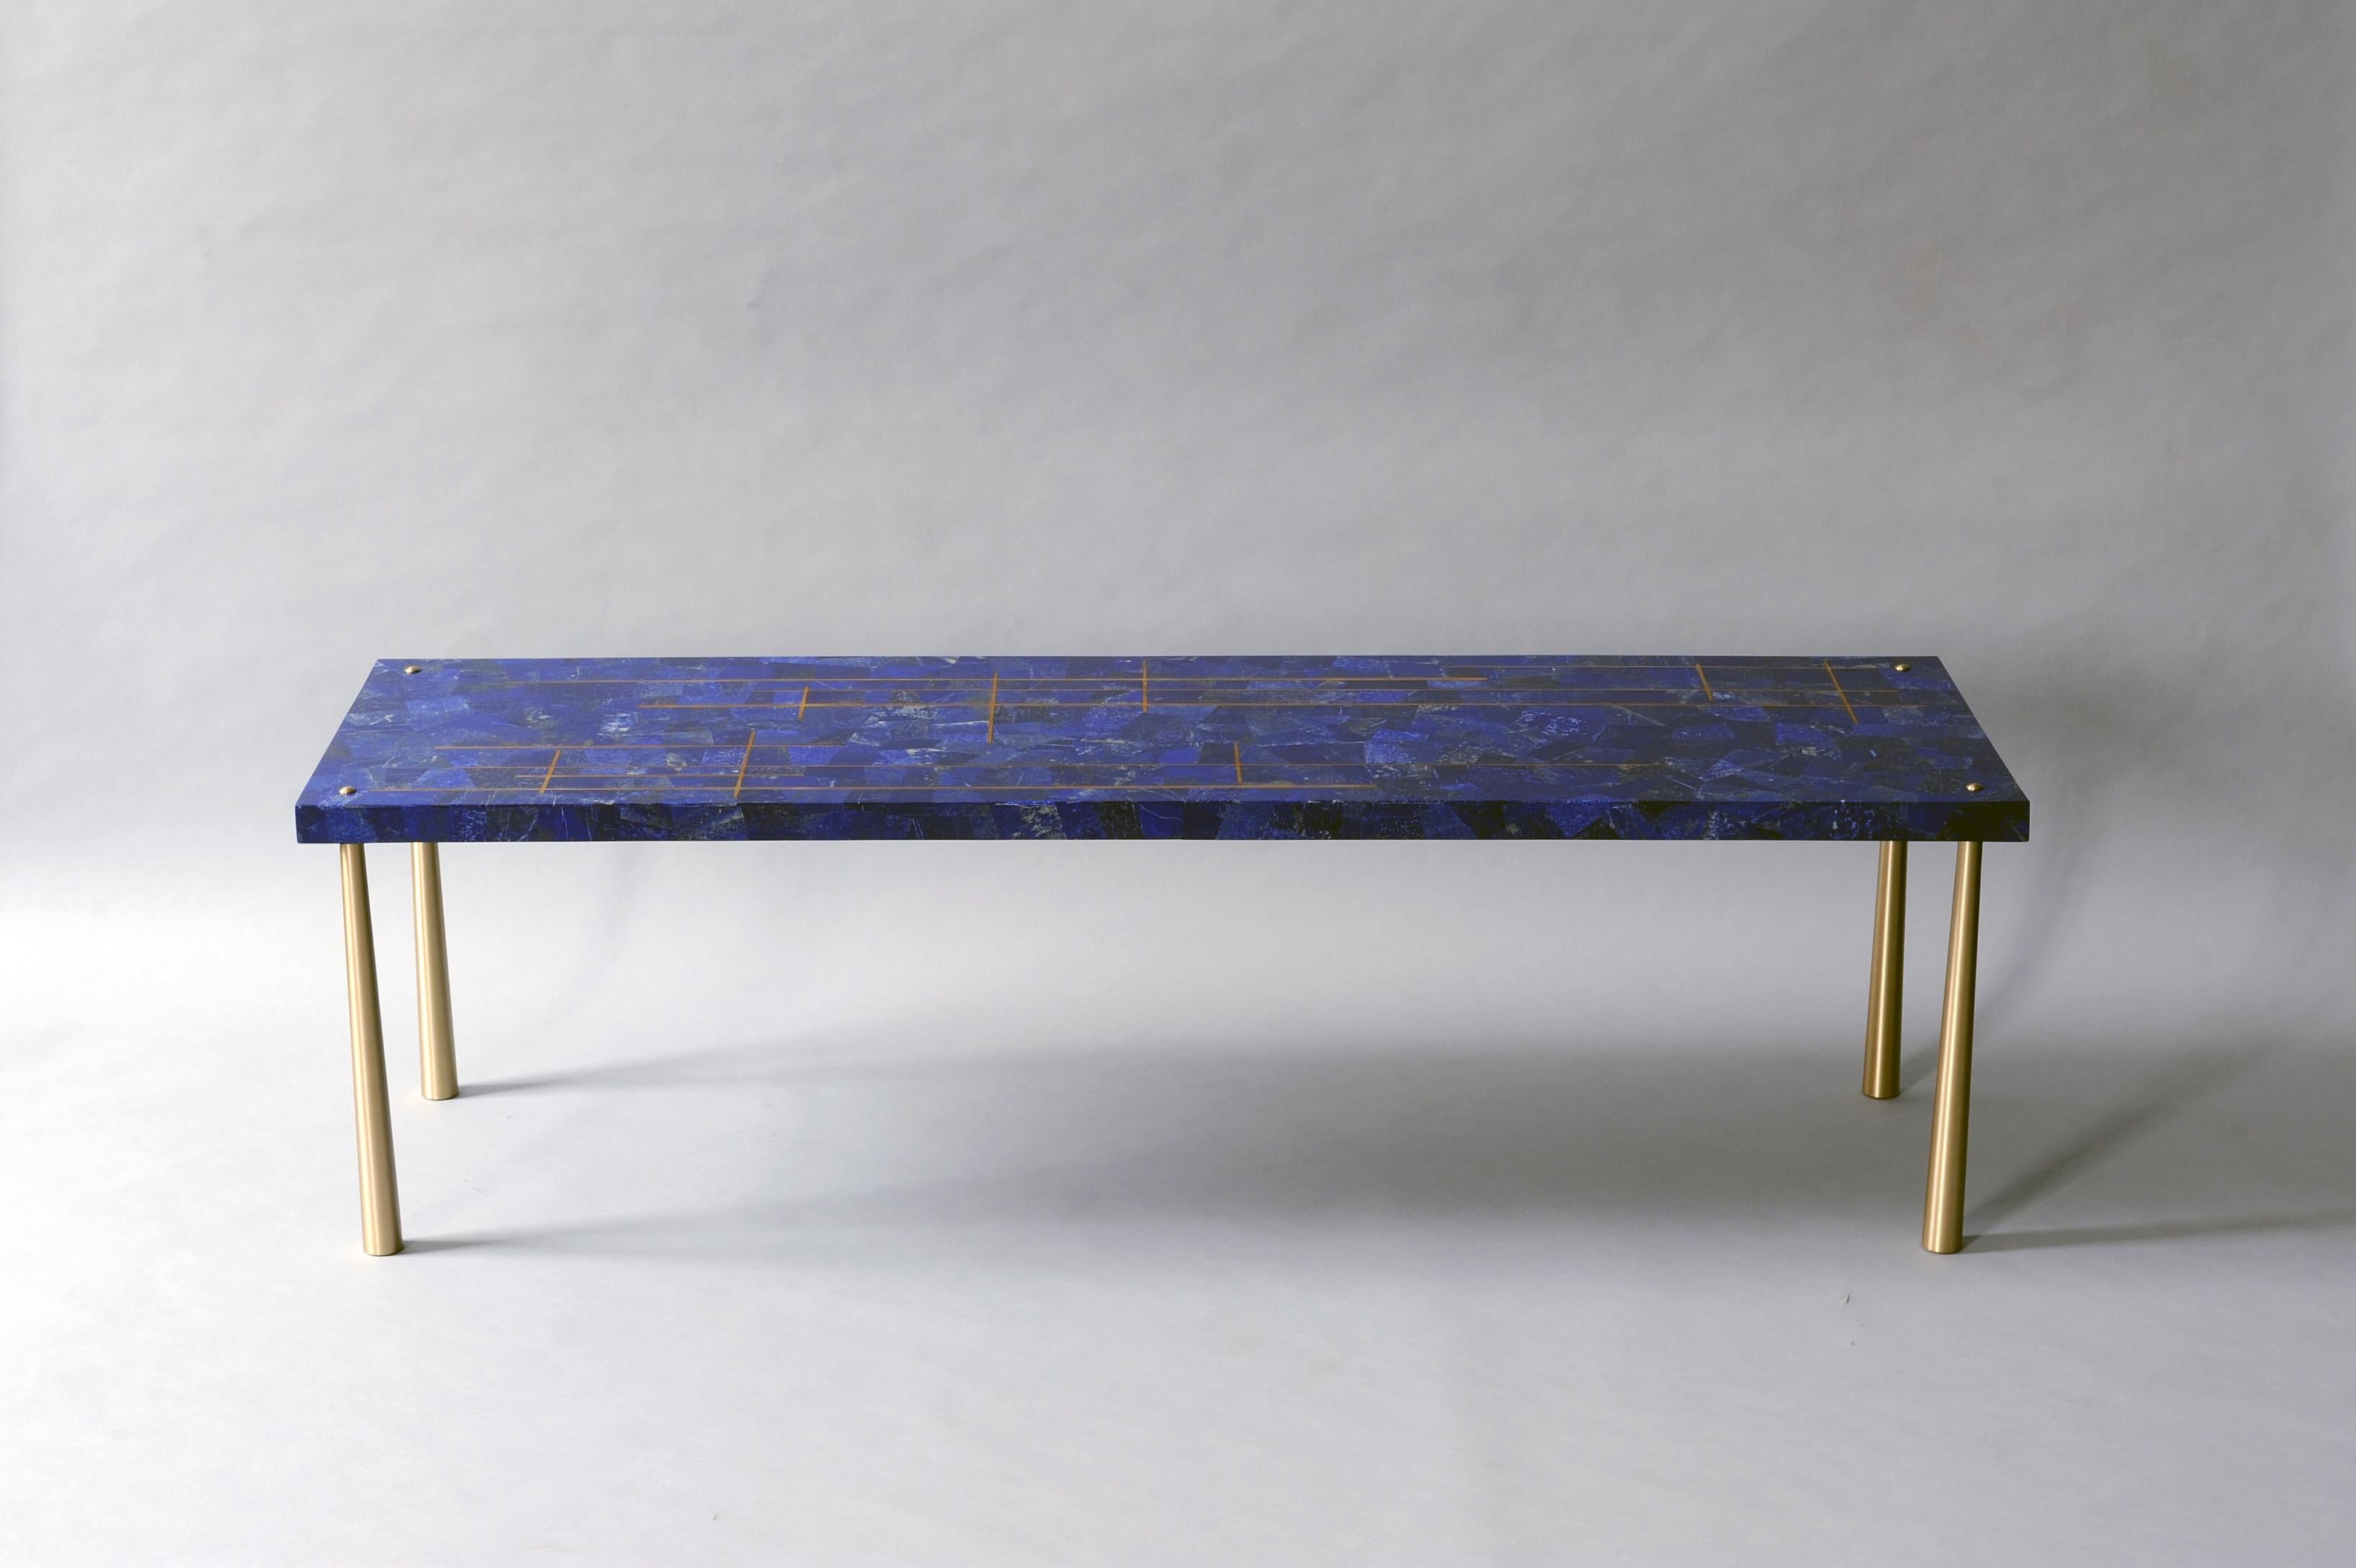 Azure coffee table by DeMuro Das
Dimensions: W 150 x D 45 x H 43.3 cm
Materials: Lacquer (traffic black 9017) - Matte, lapis Lazuli - polished (Random)
 Solid Brass (Satin) Legs

Dimensions and finishes can be customized.

DeMuro Das is an